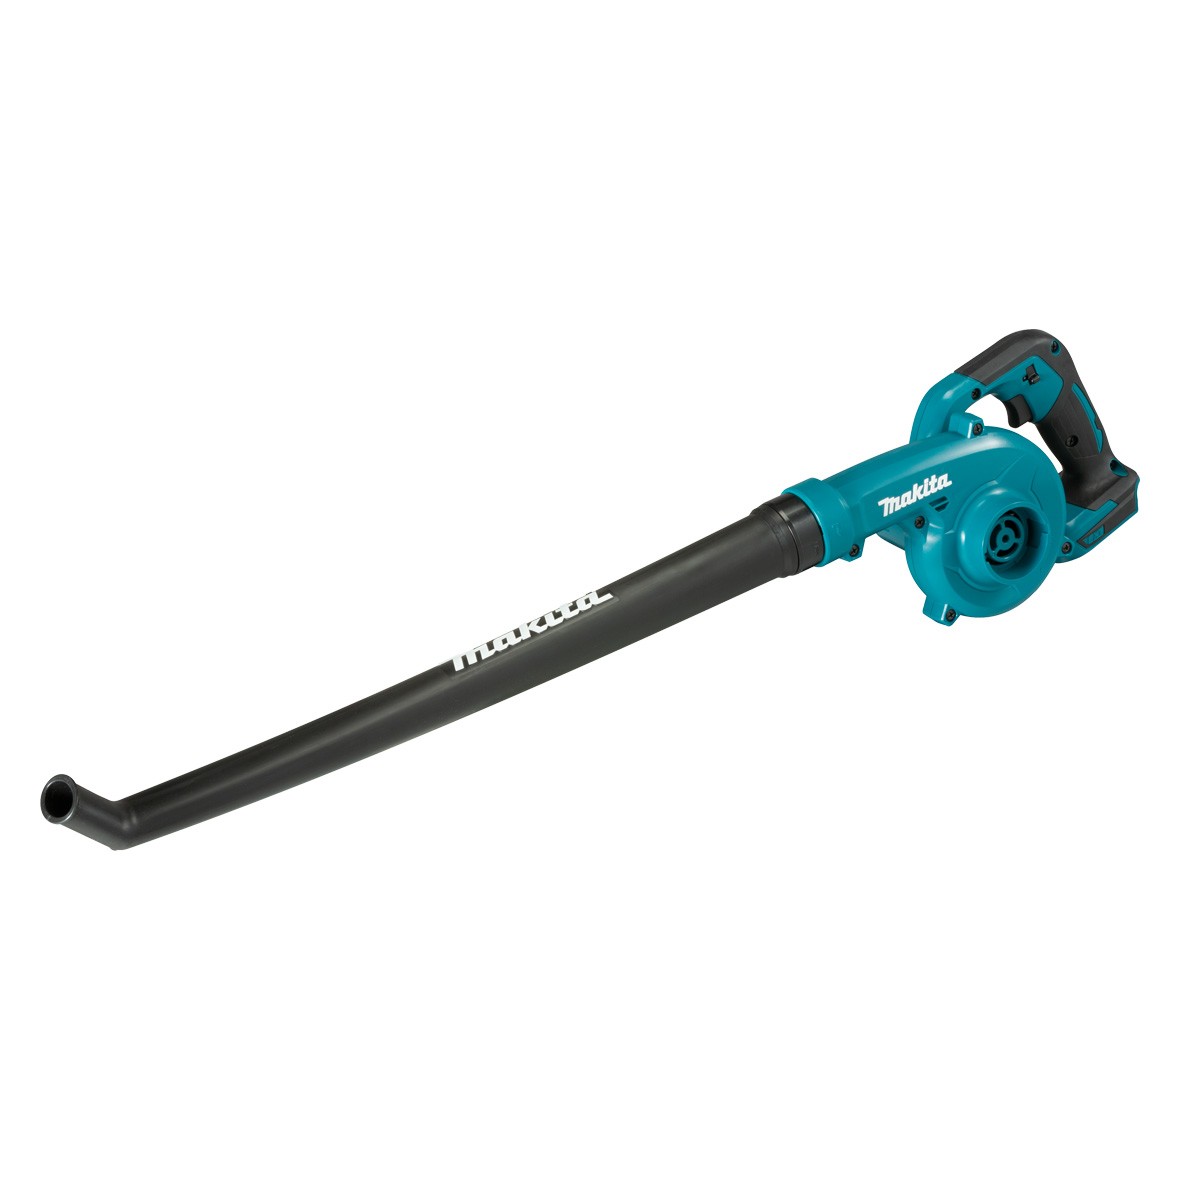 18V Long Nozzle Blower Bare (Tool Only) DUB186Z by Makita